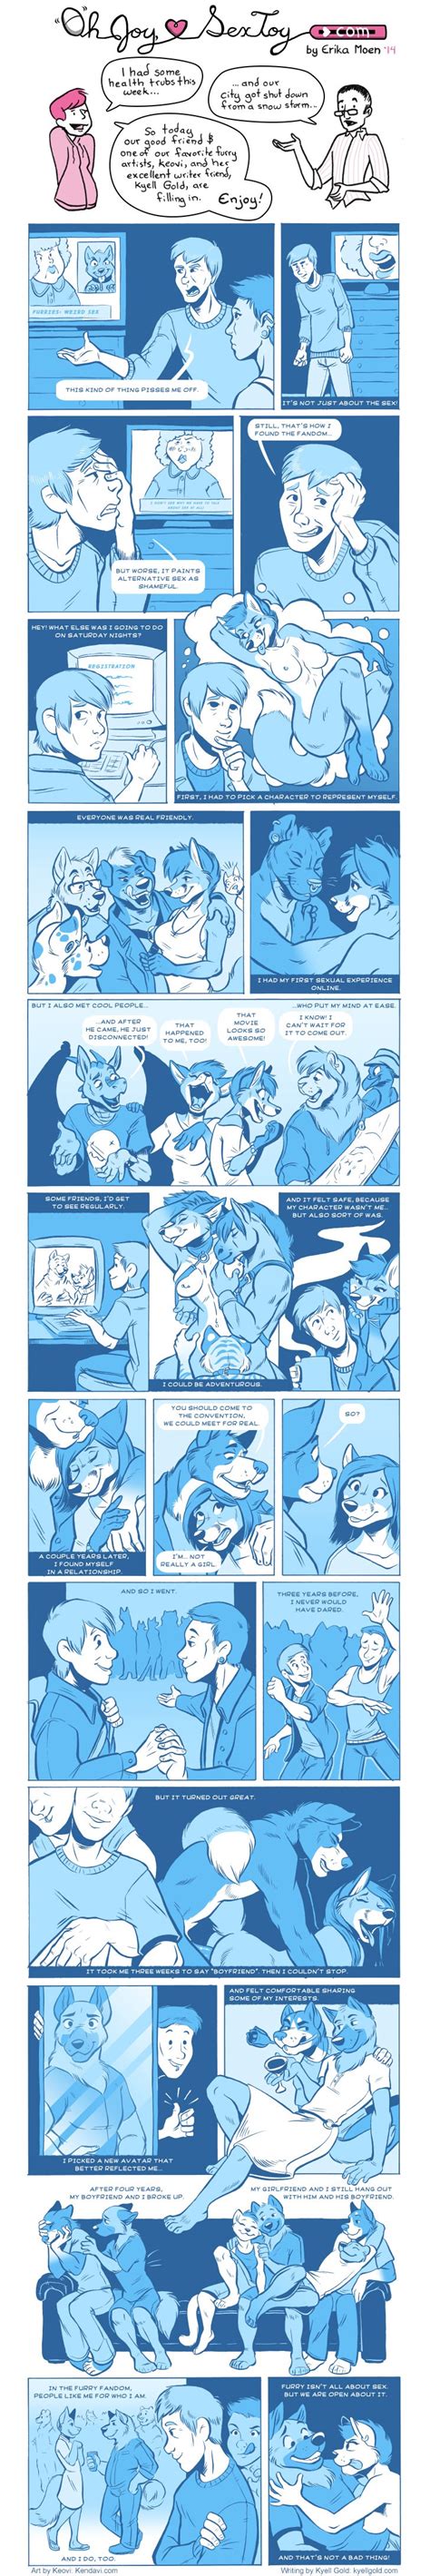 Being A Furry Isnt All About Sex By Erika Moen The Nib Medium